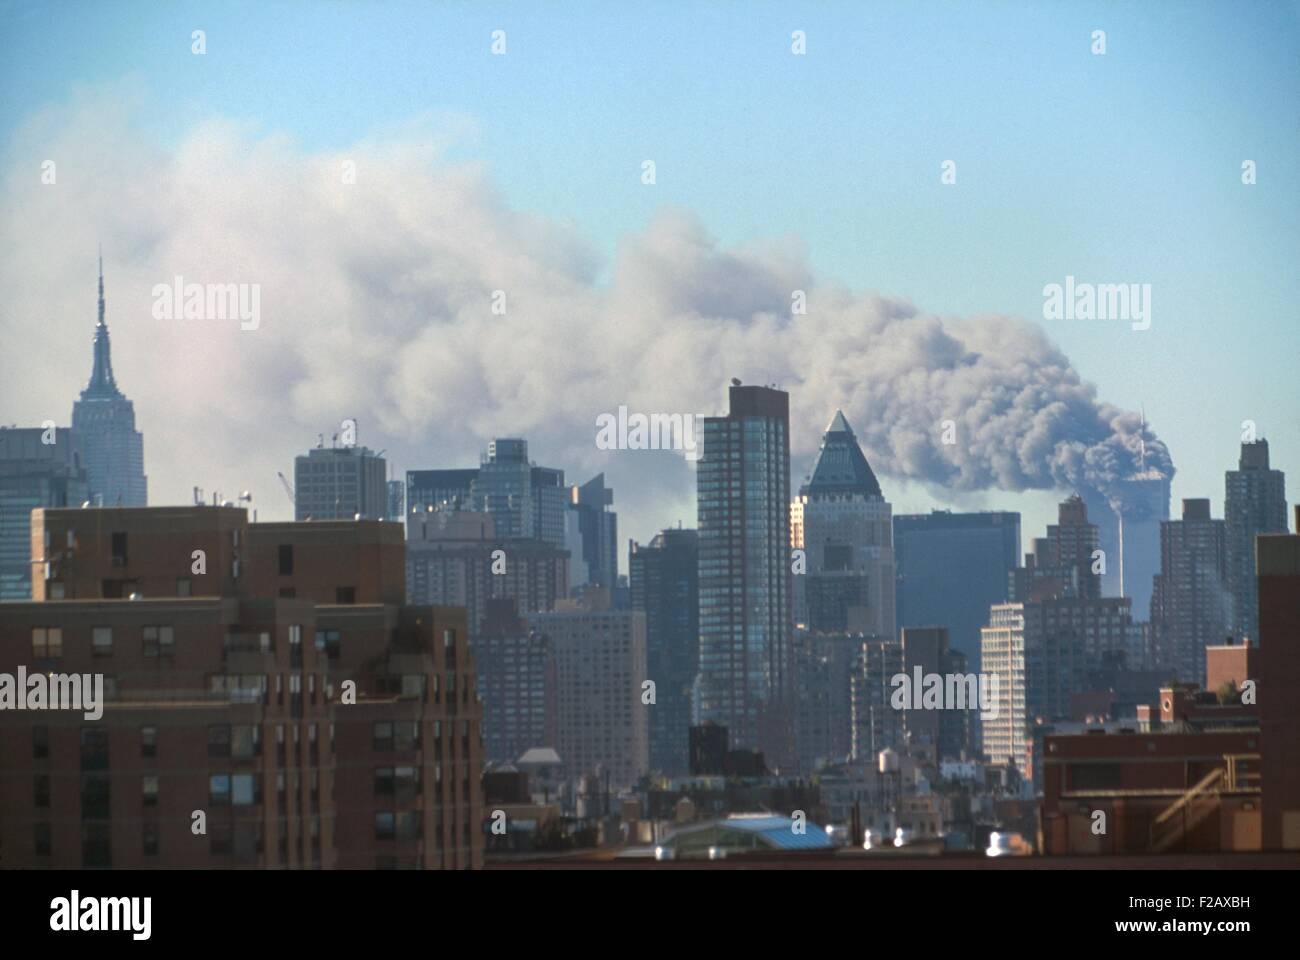 Smoke billowing from the Twin Towers following September 11th terrorist attack on World Trade Center. Photo taken from the Midtown west near 60th street within the first 72 minutes of the attack. New York City, Sept. 11, 2001. (BSLOC 2015 2 39) Stock Photo